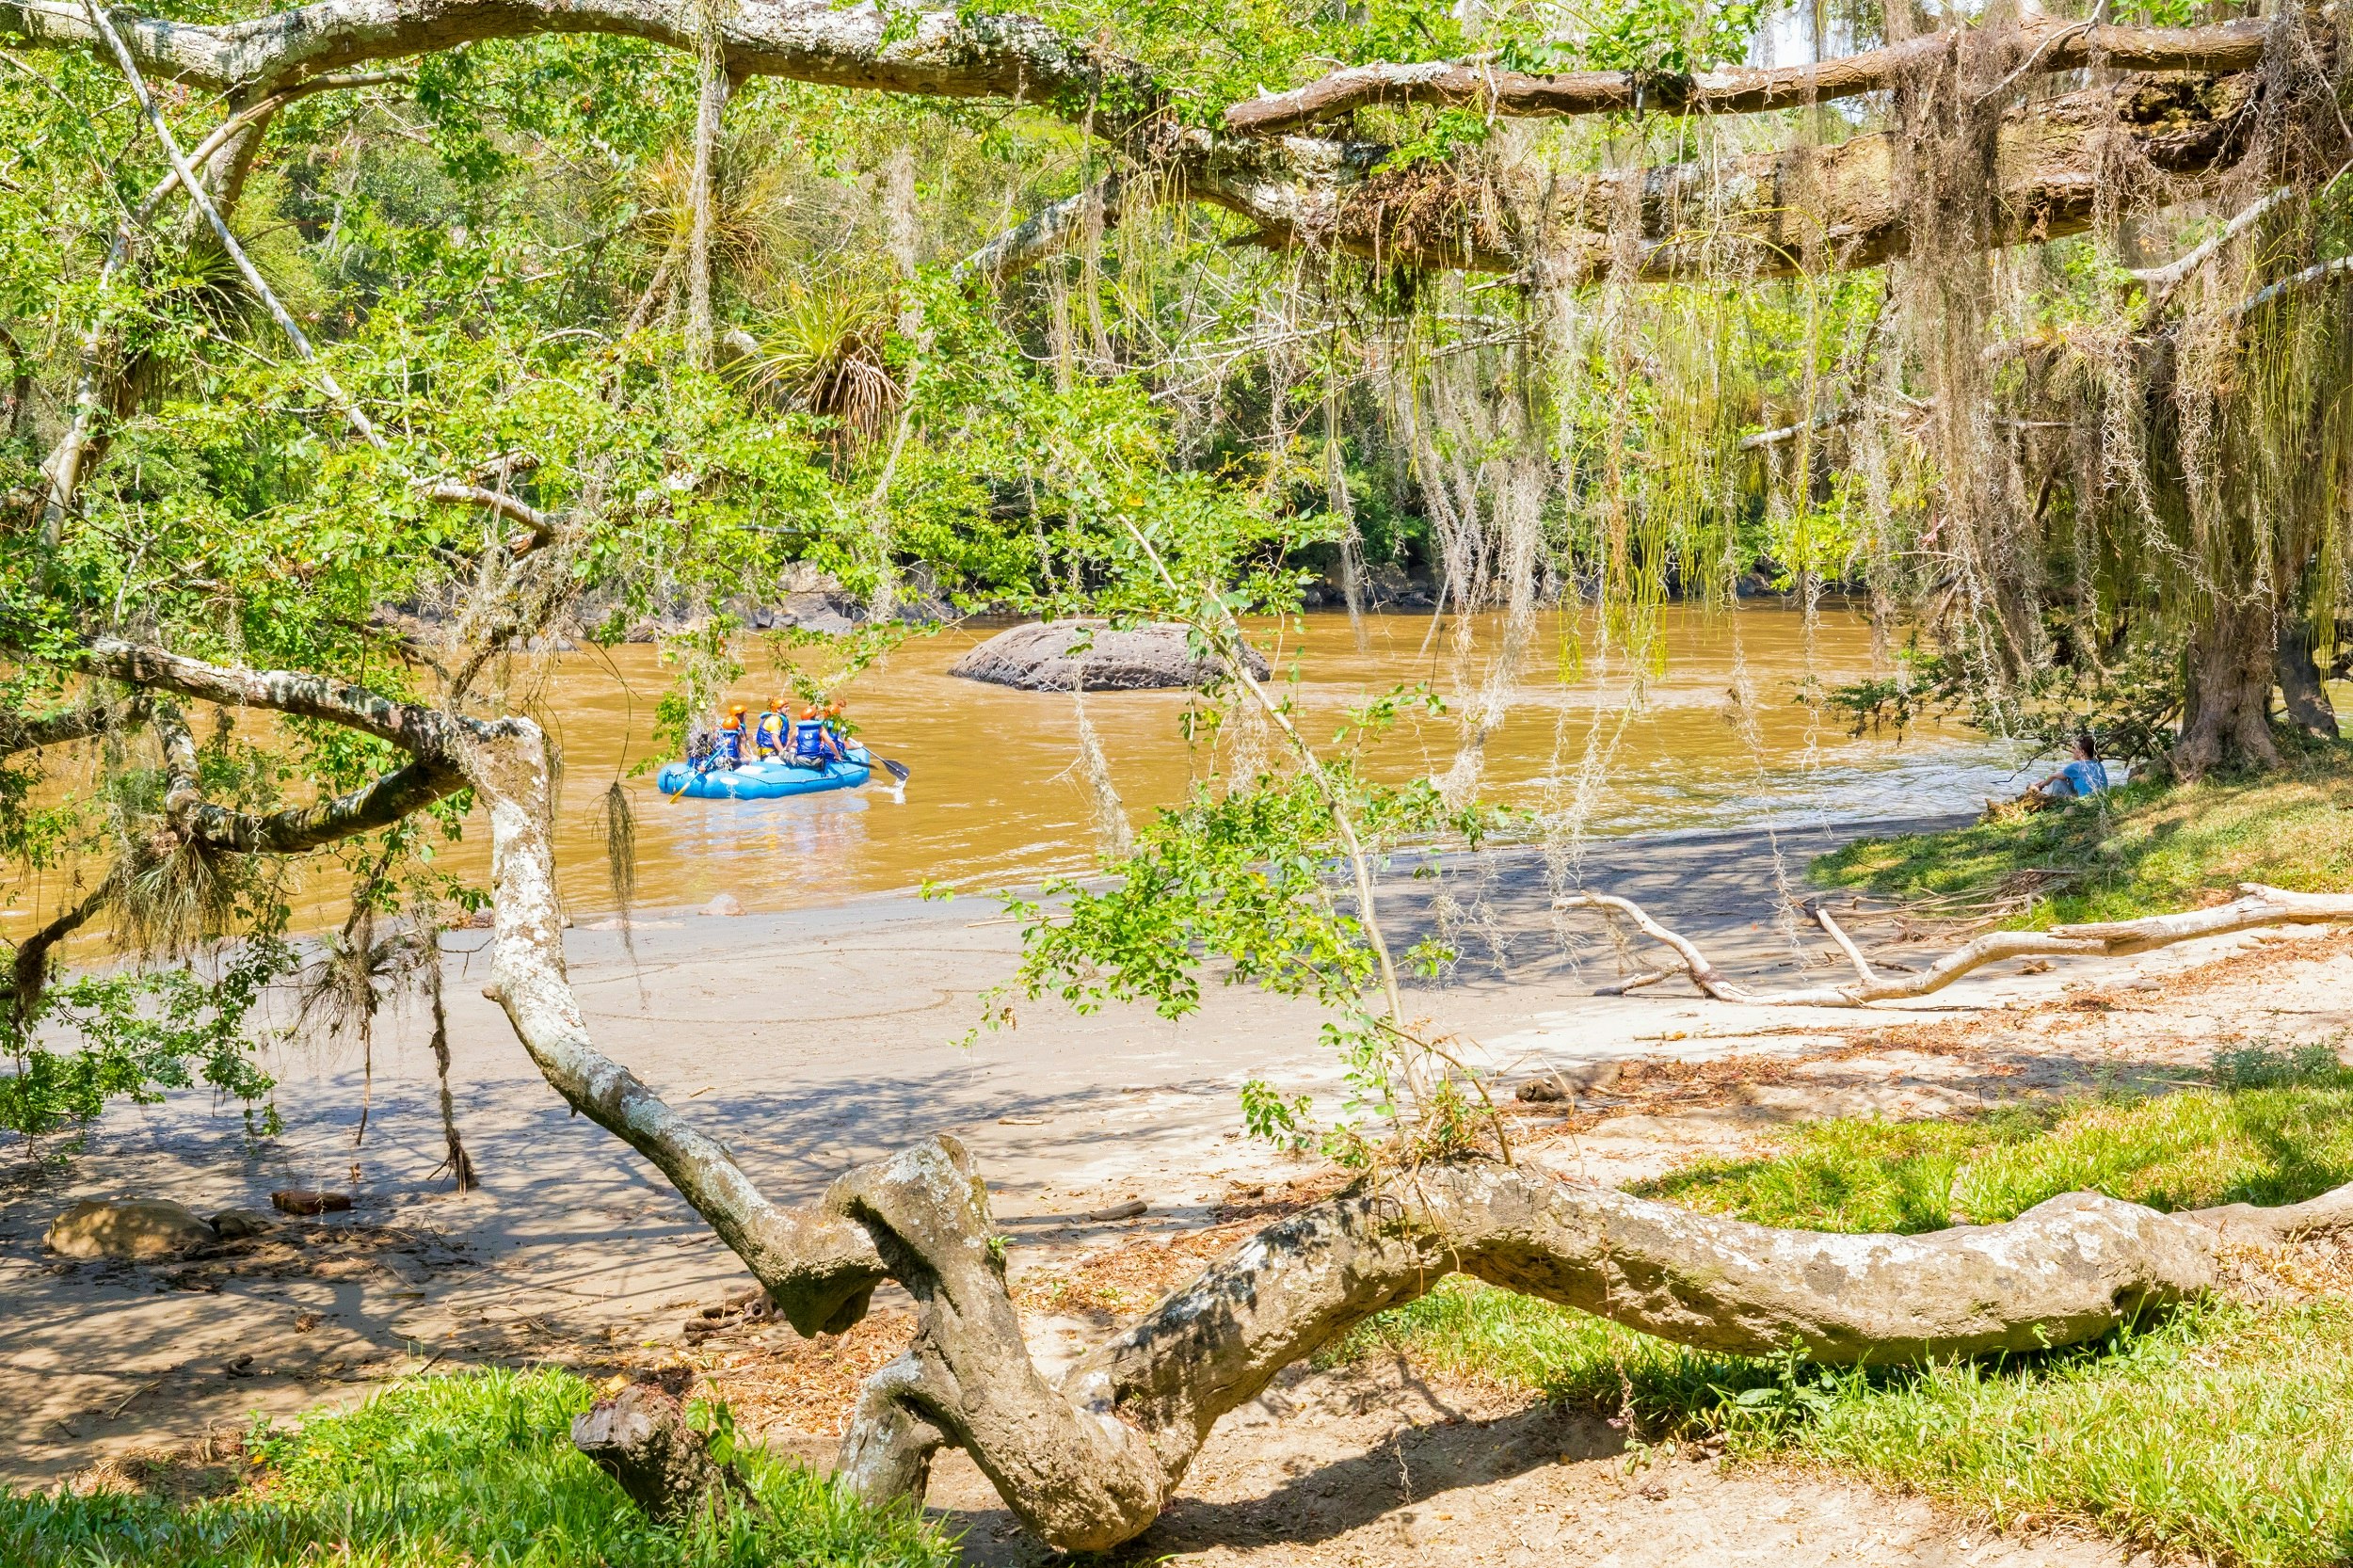 Shot through trees, a whitewater raft with five paddlers is seen making its way down the muddy Rio Fonce near San Gil.